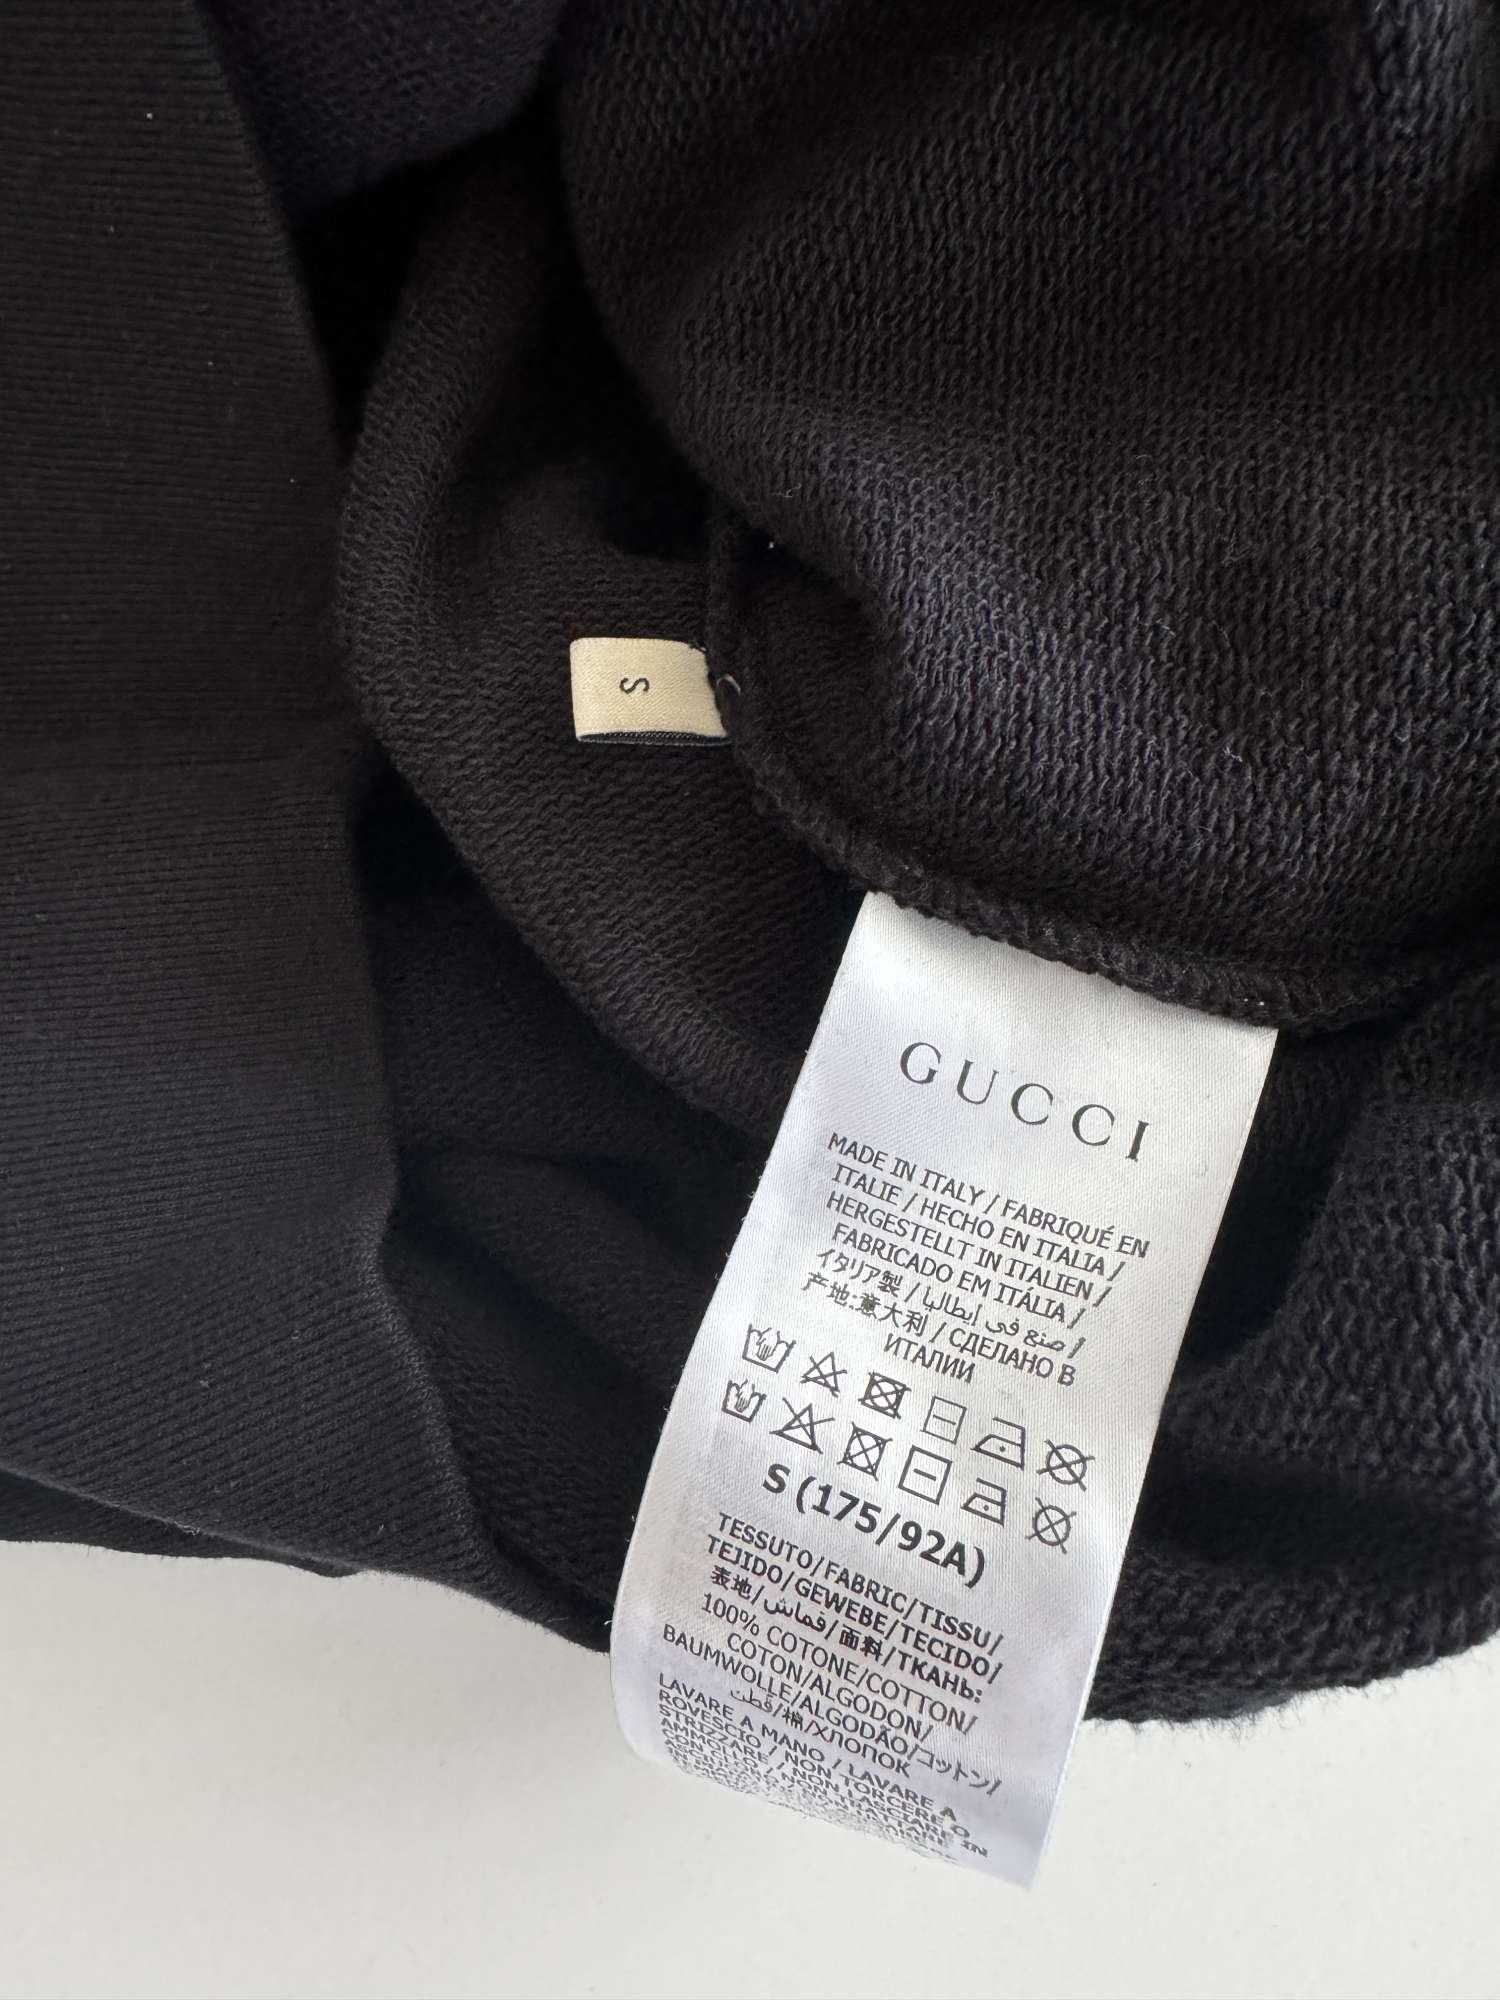 Gucci X The North Face mikina